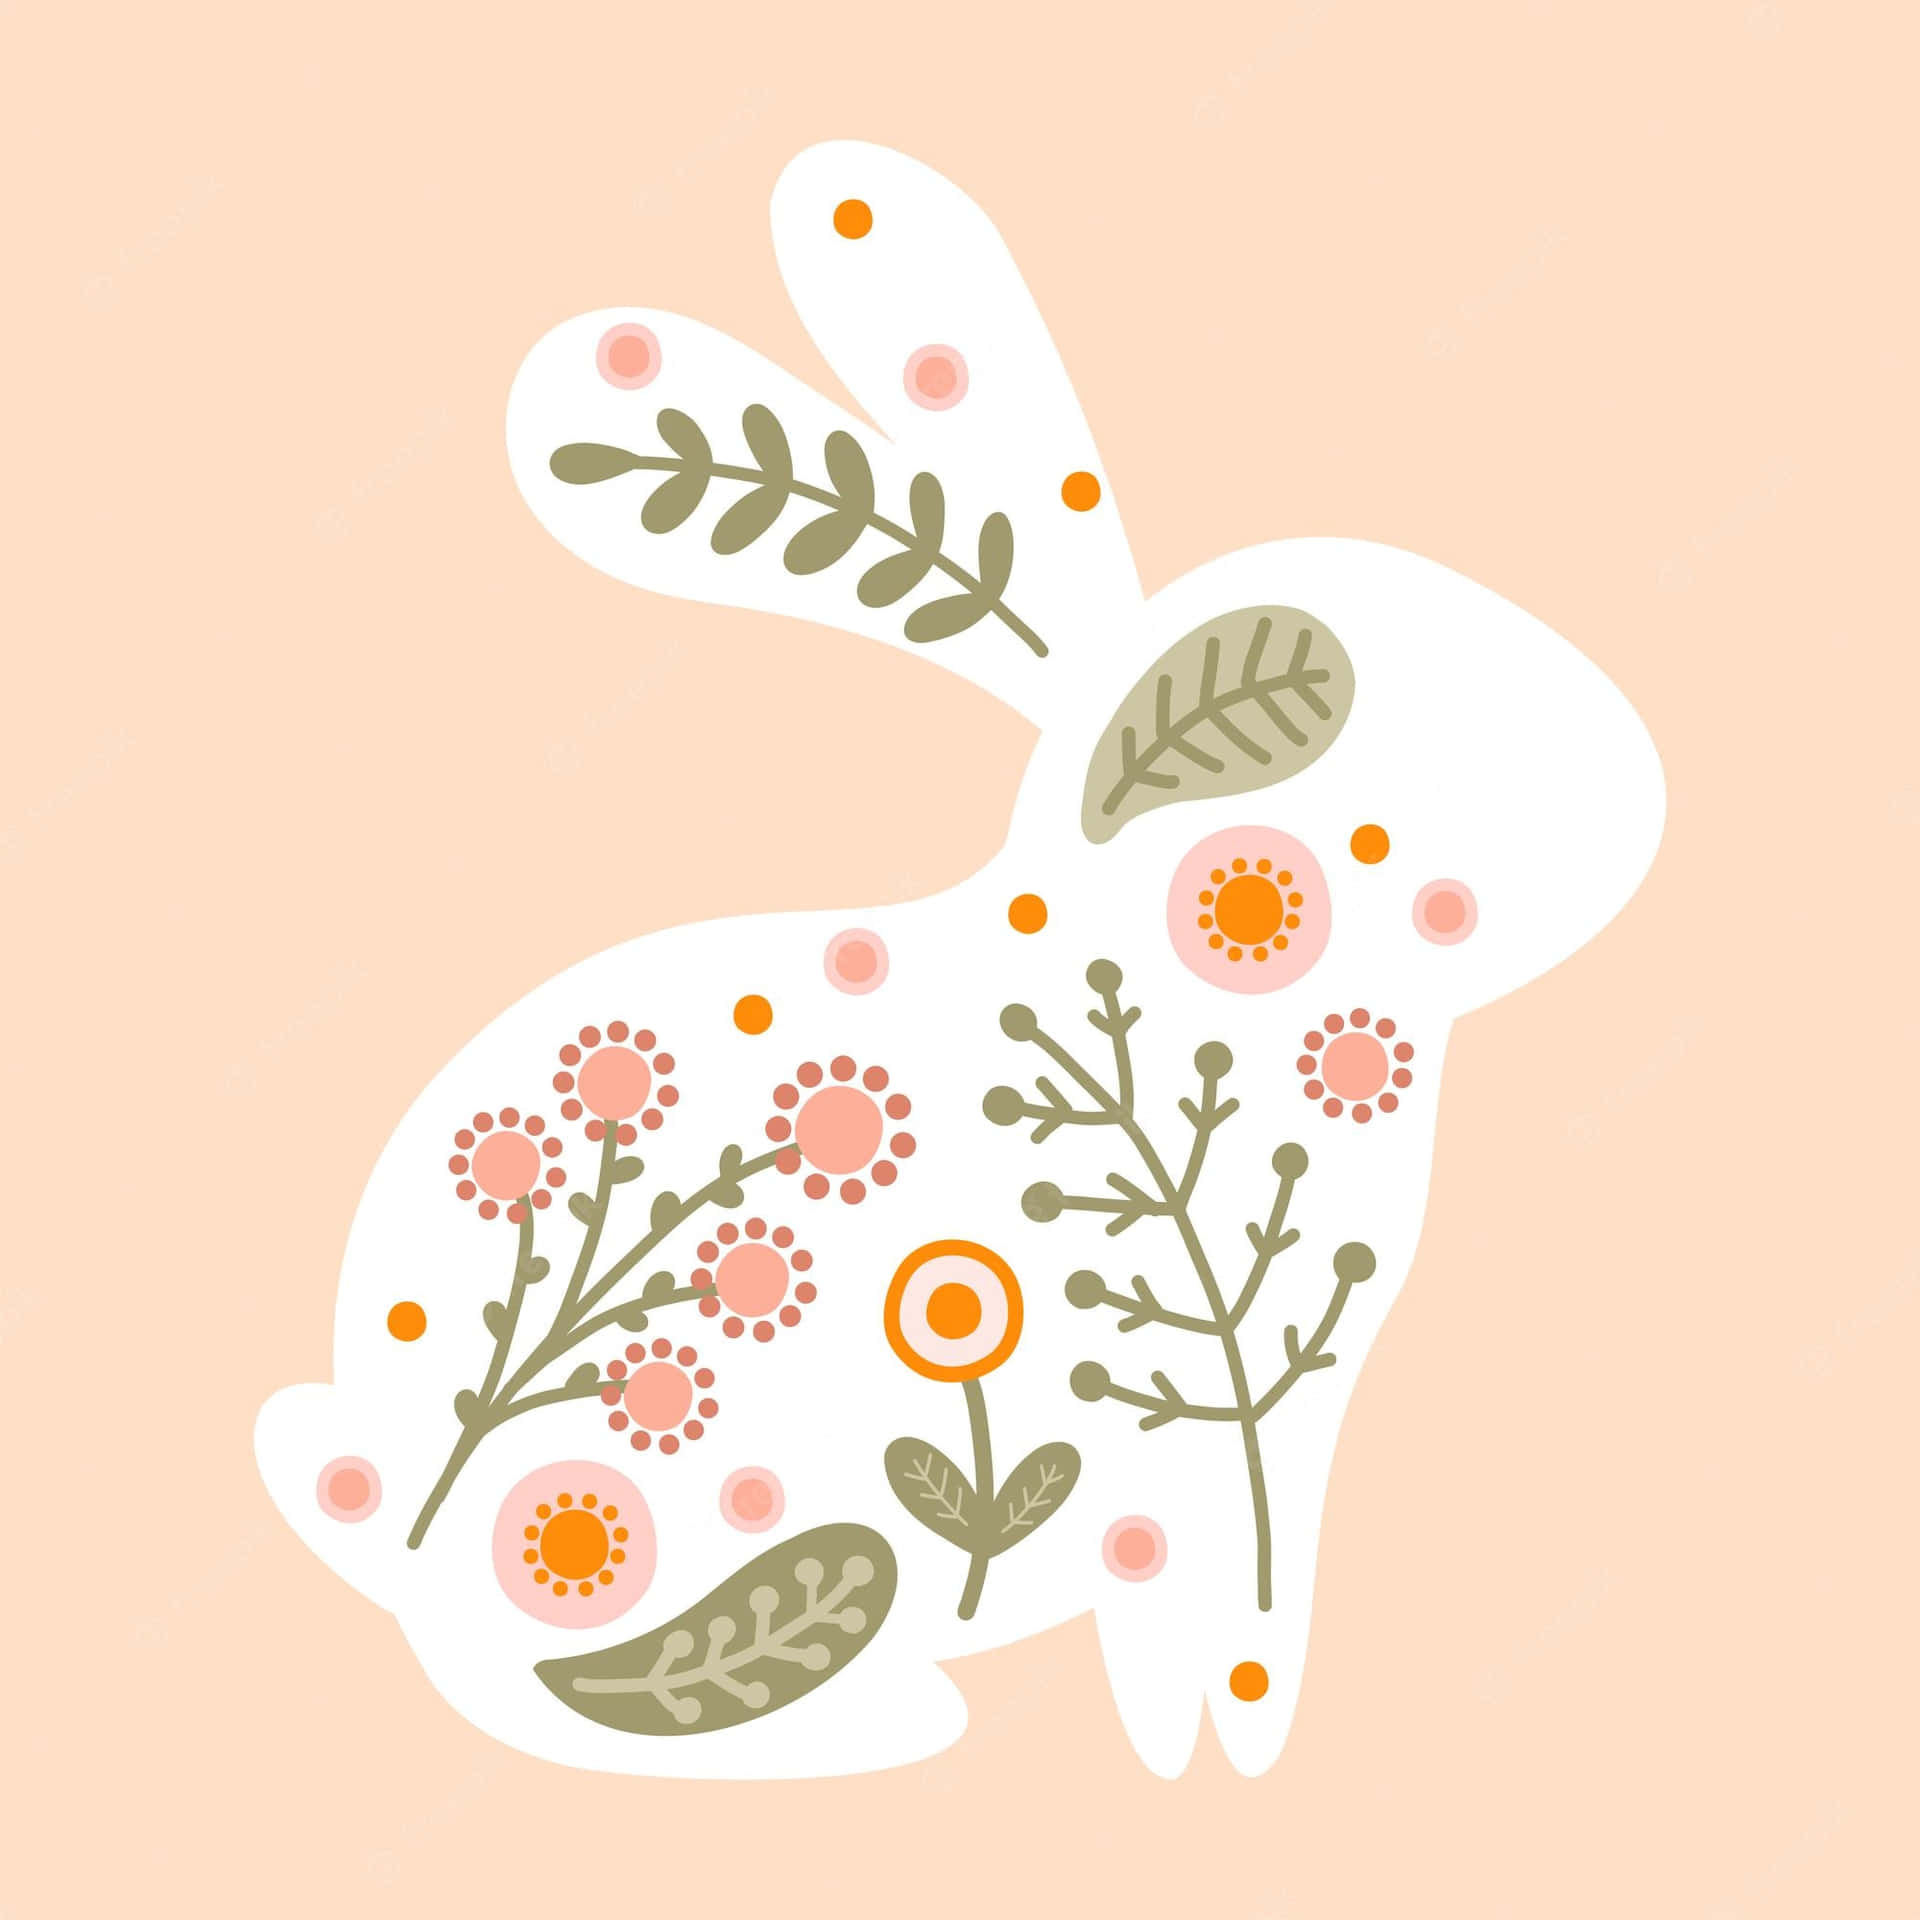 "A fluffy bunny hops among the spring wildflowers."